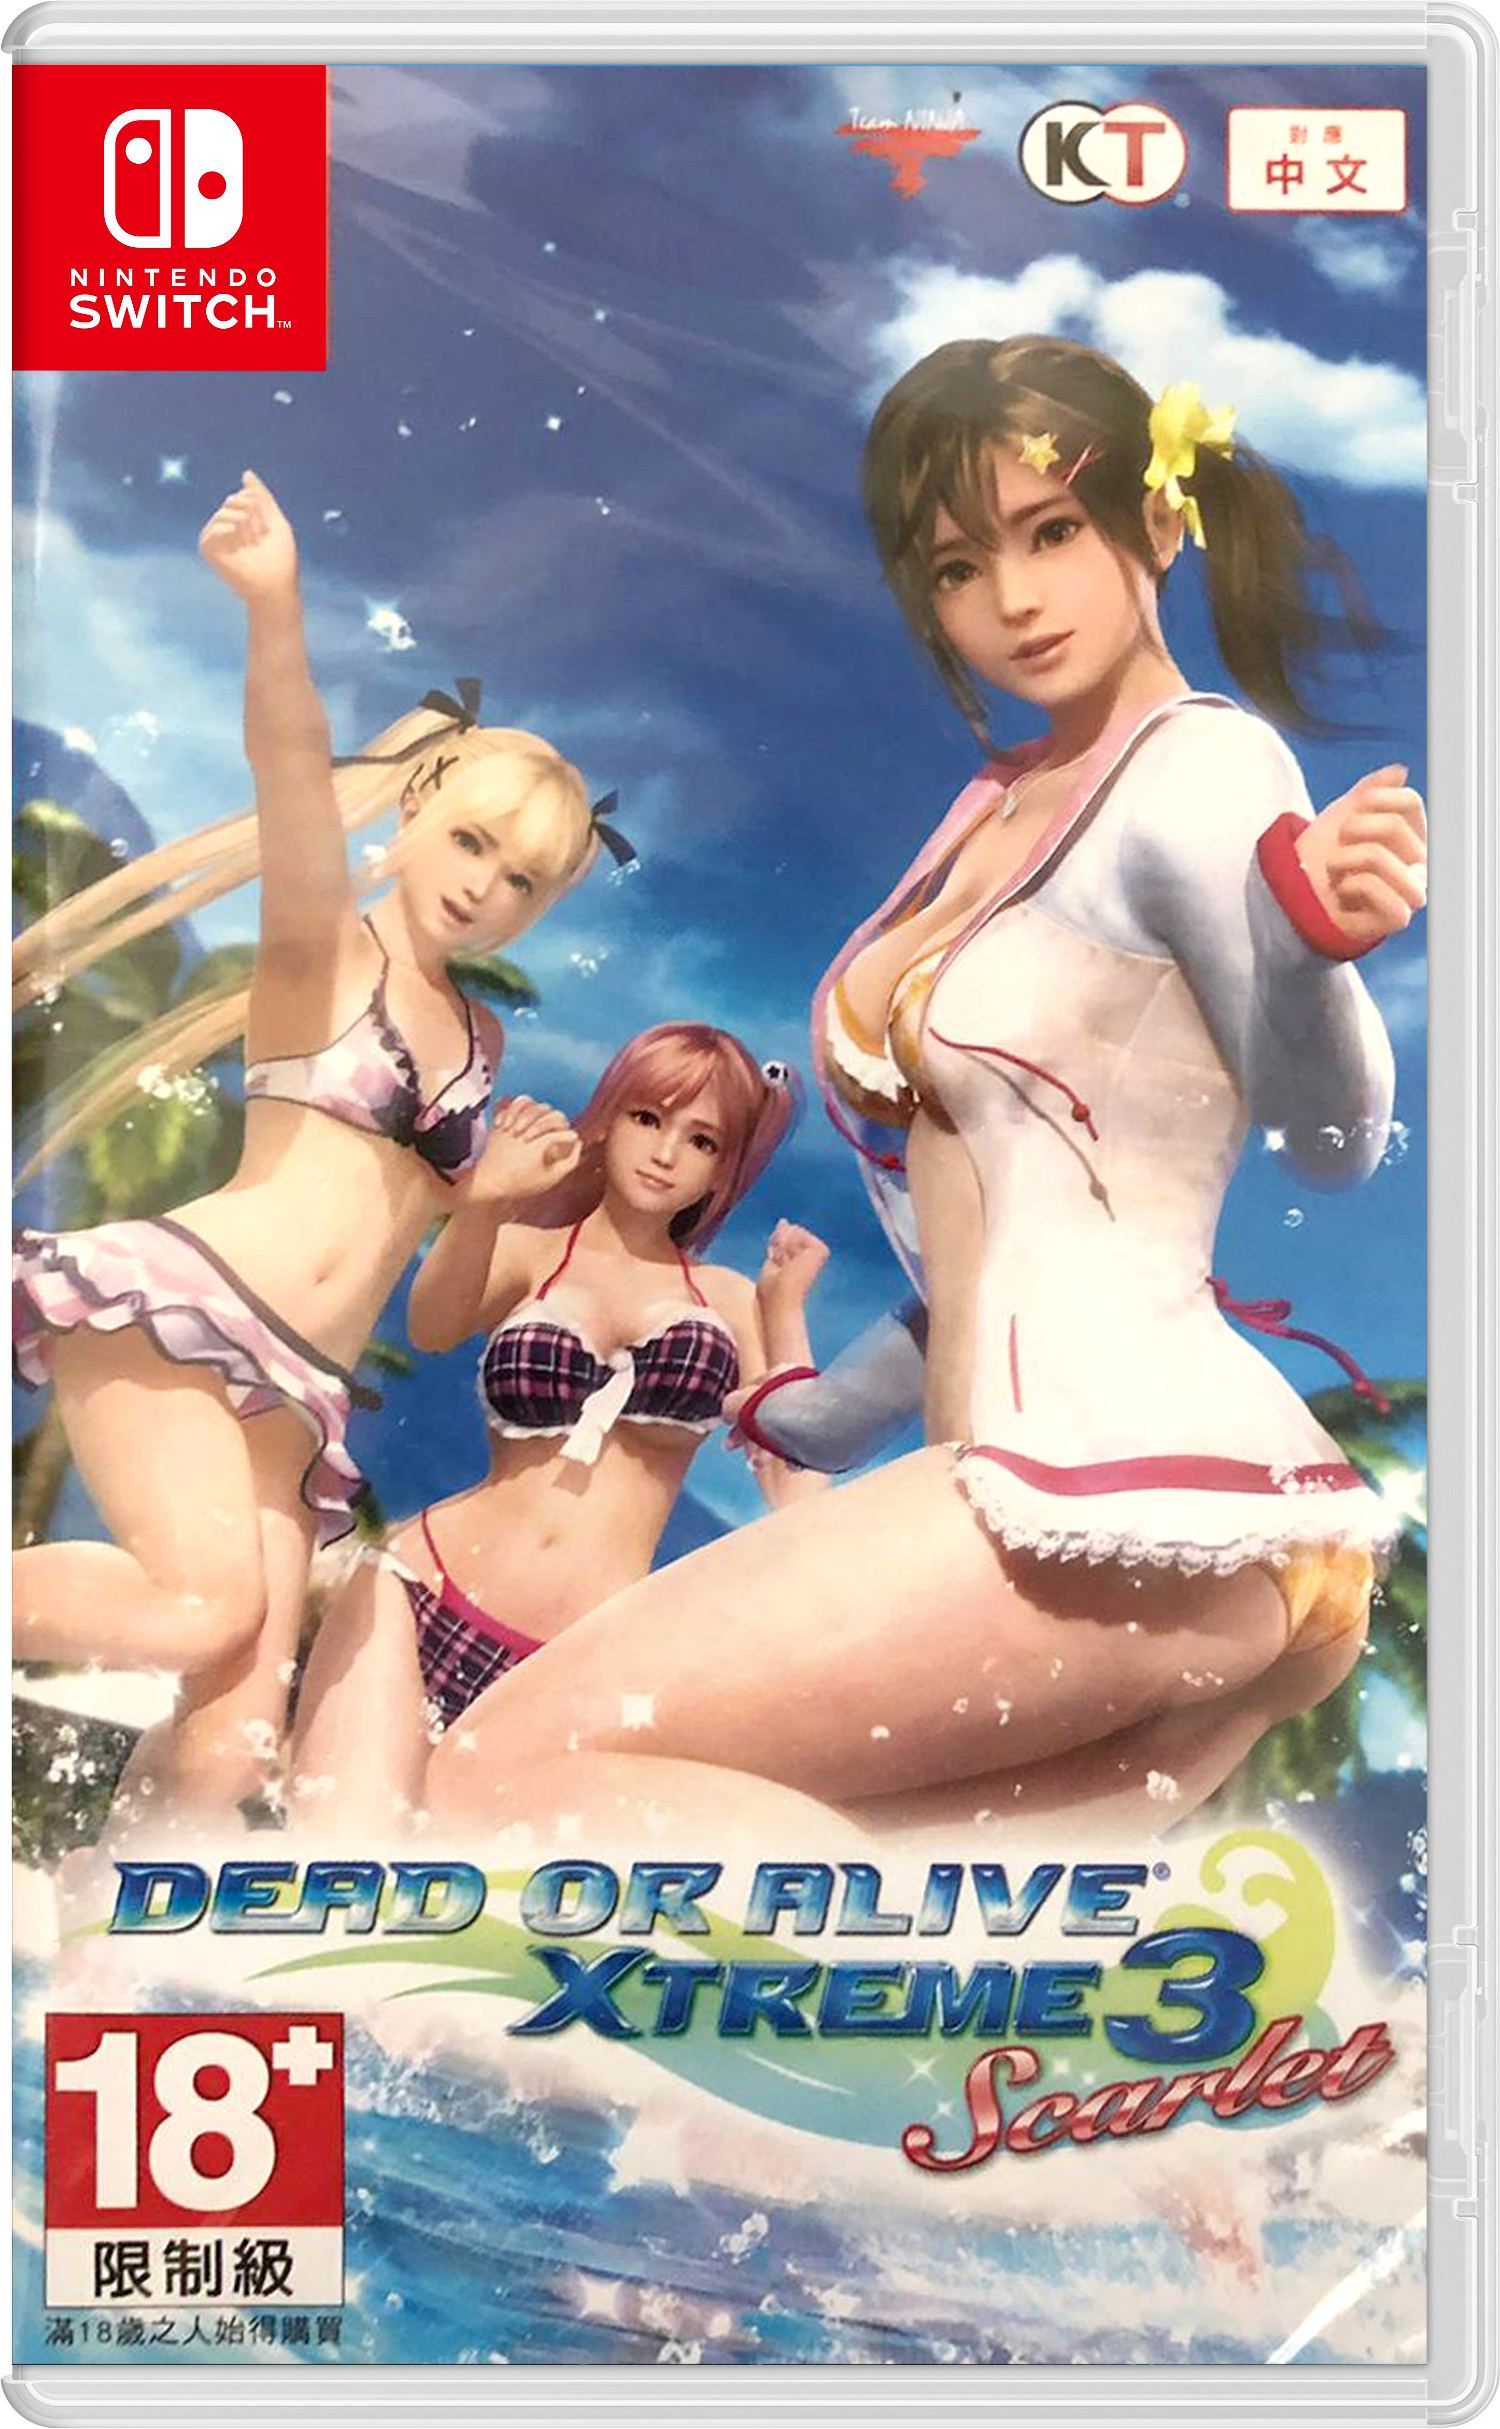 Dead or Alive Xtreme 3: Scarlet (Multi-Language) for Nintendo Switch